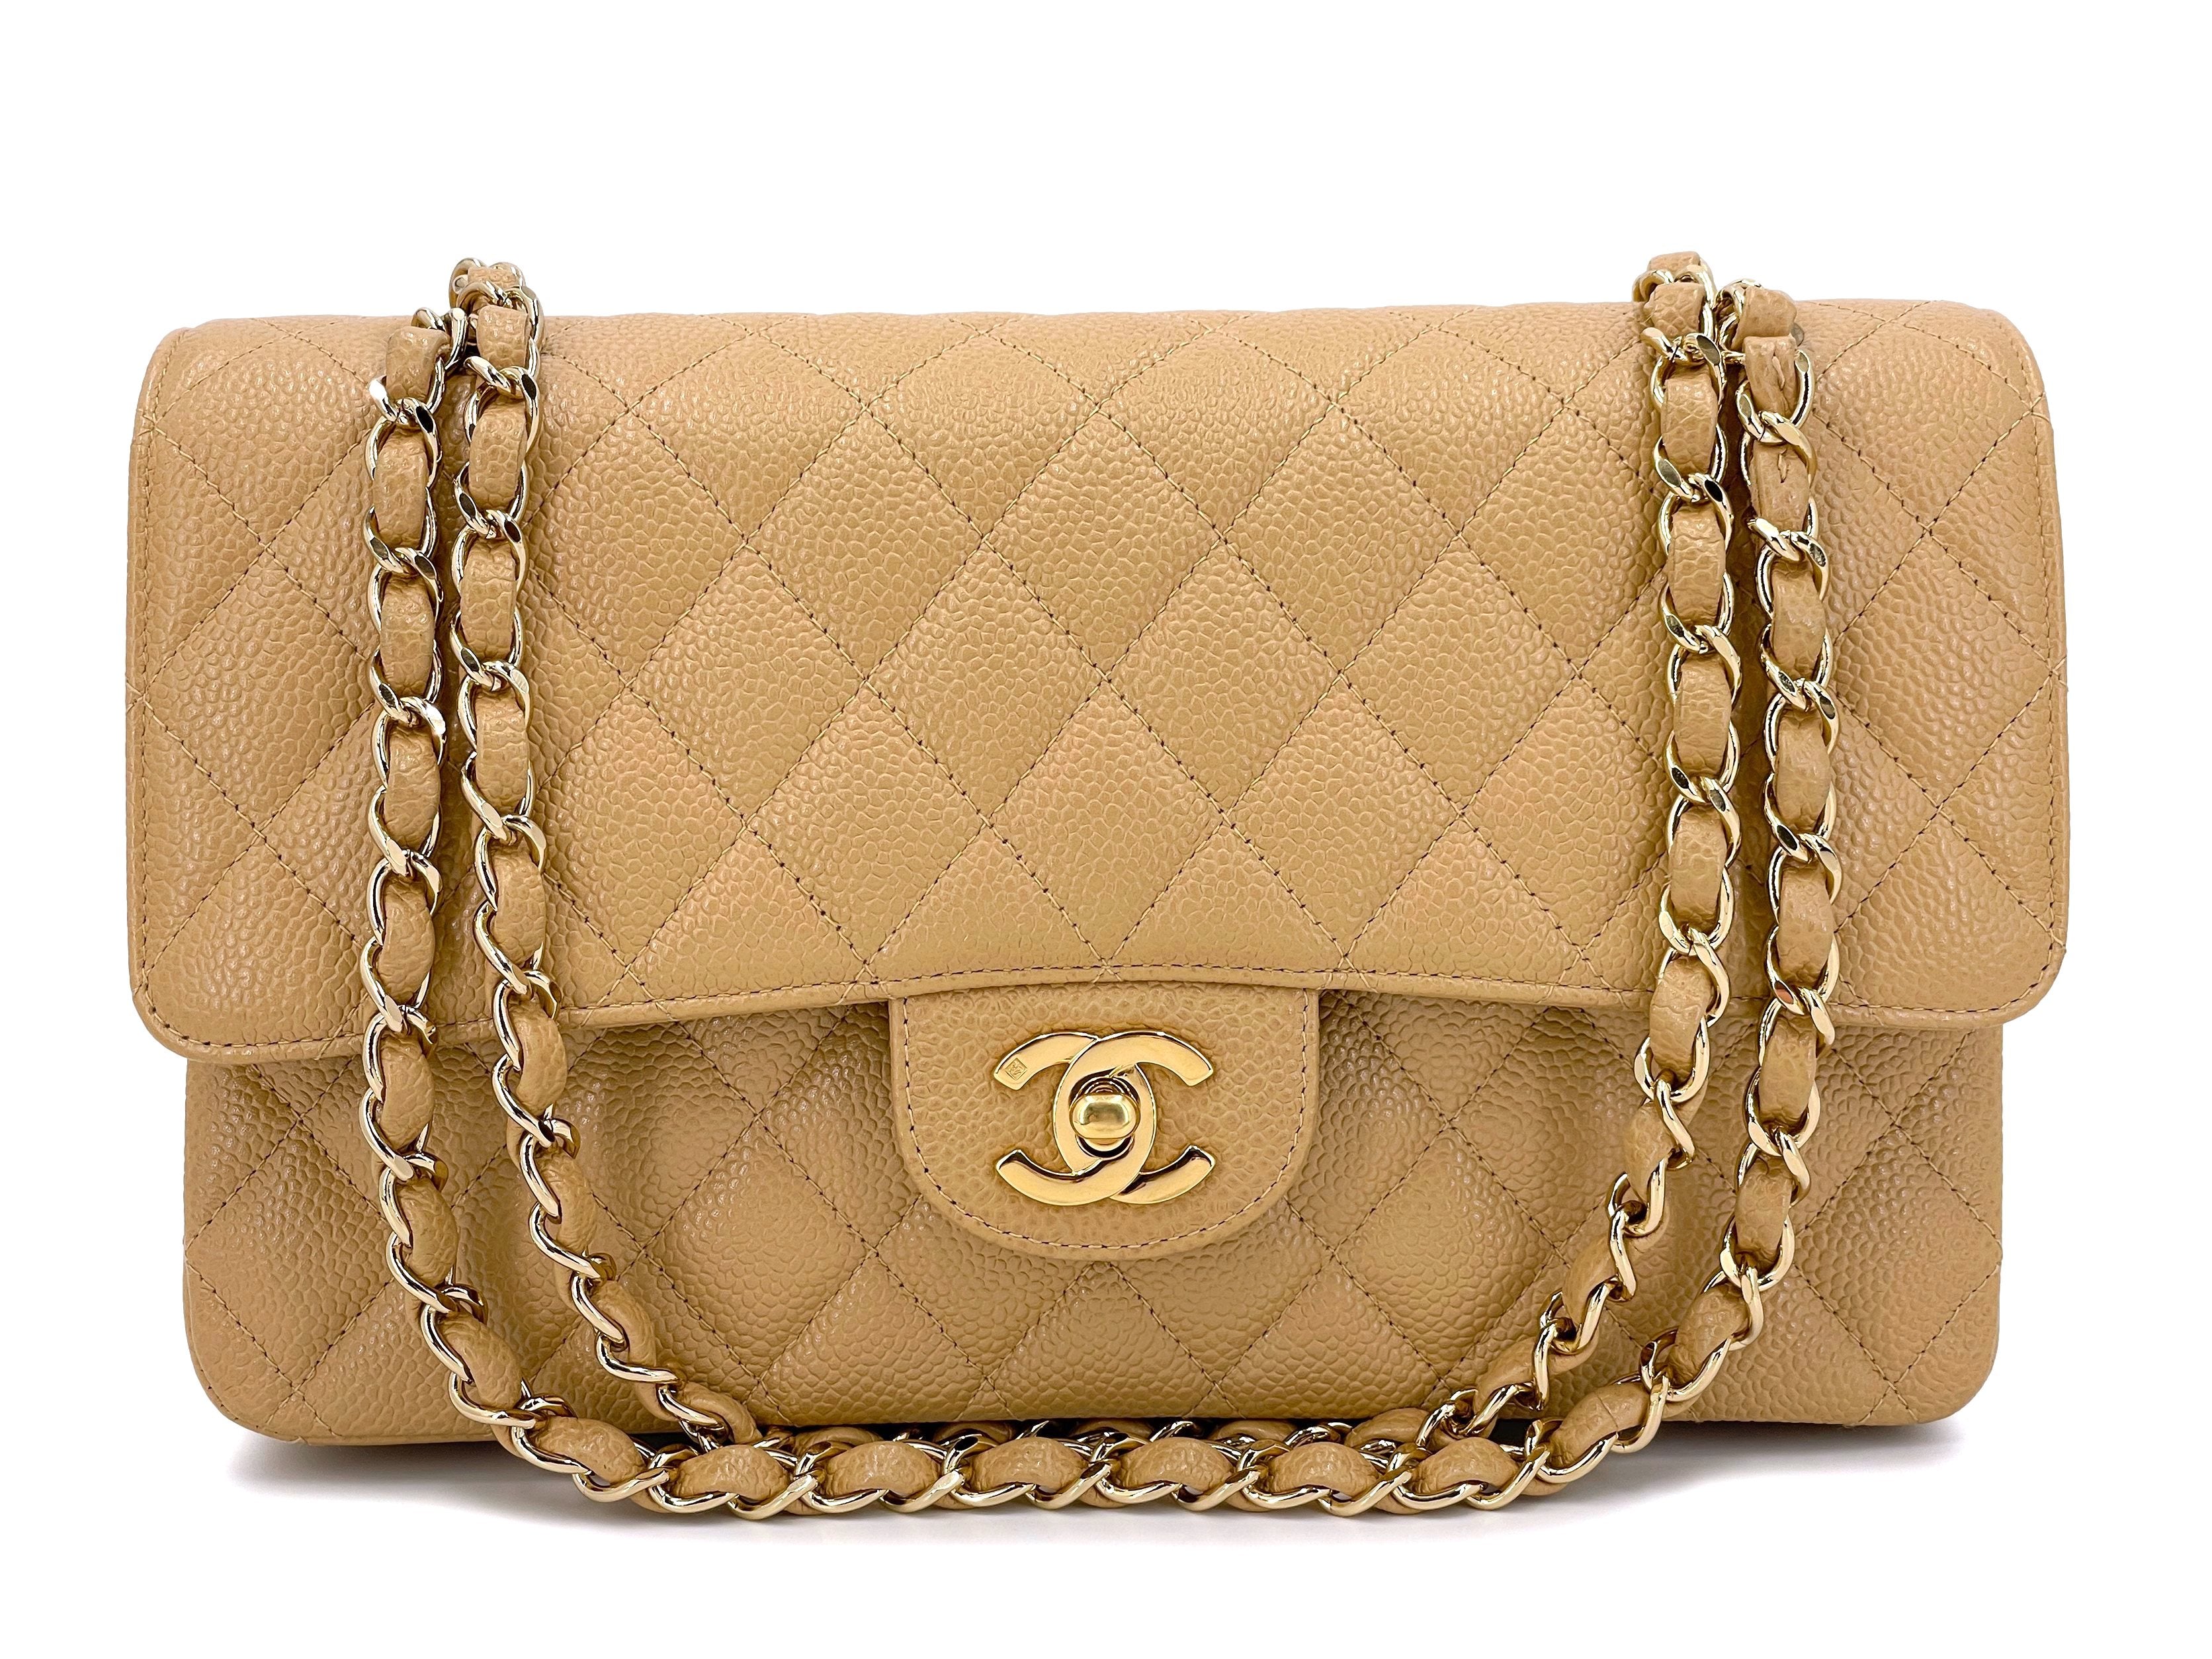 Shop authentic new, pre-owned, vintage CHANEL handbags - Timeless Luxuries  - Page 3